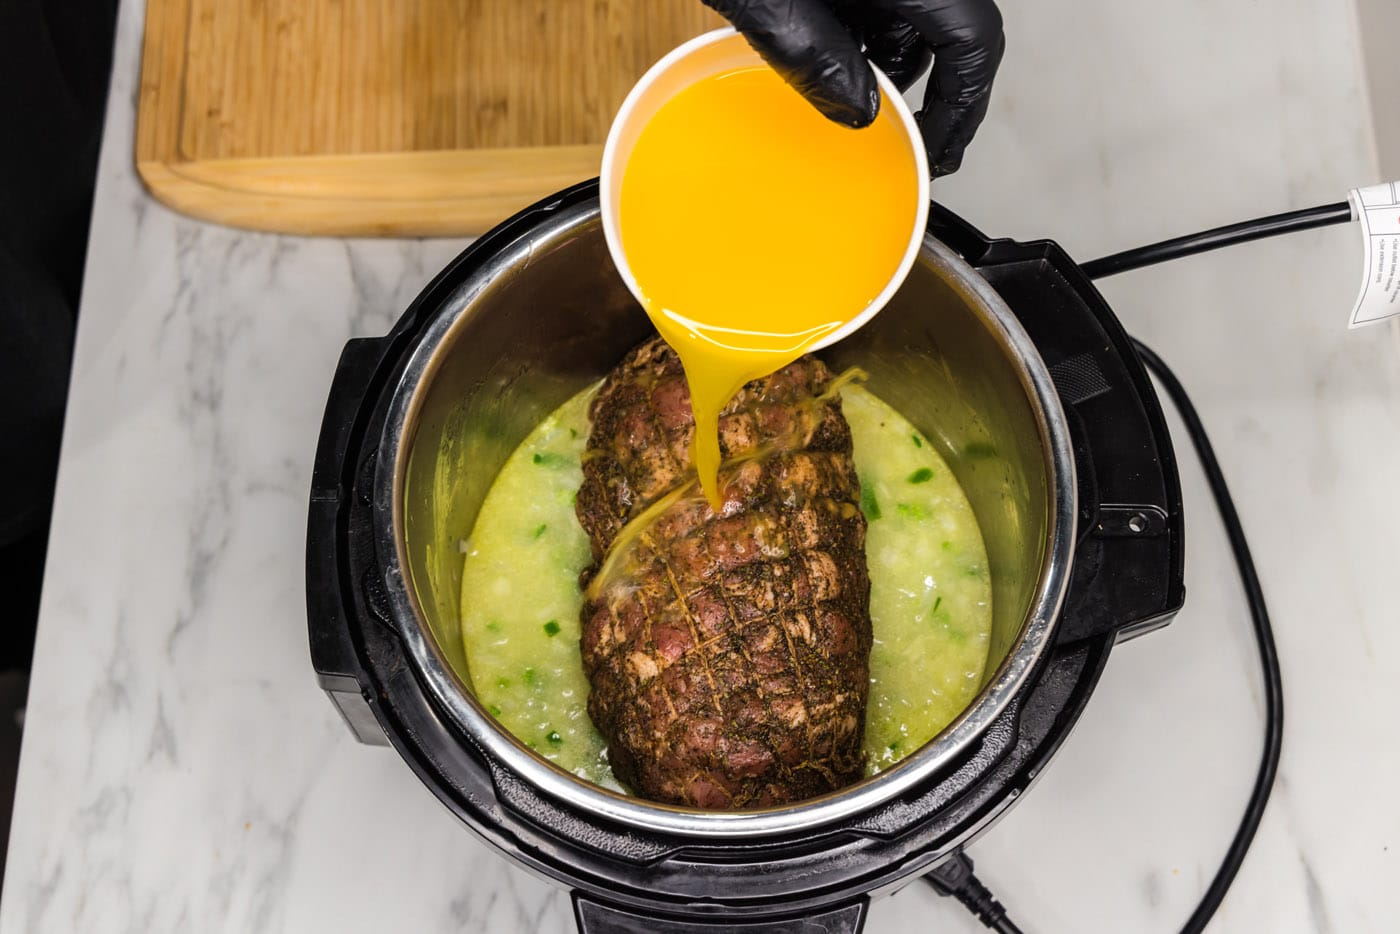 pouring orange juice into instant pot with jalapeno, onion, and pork roast